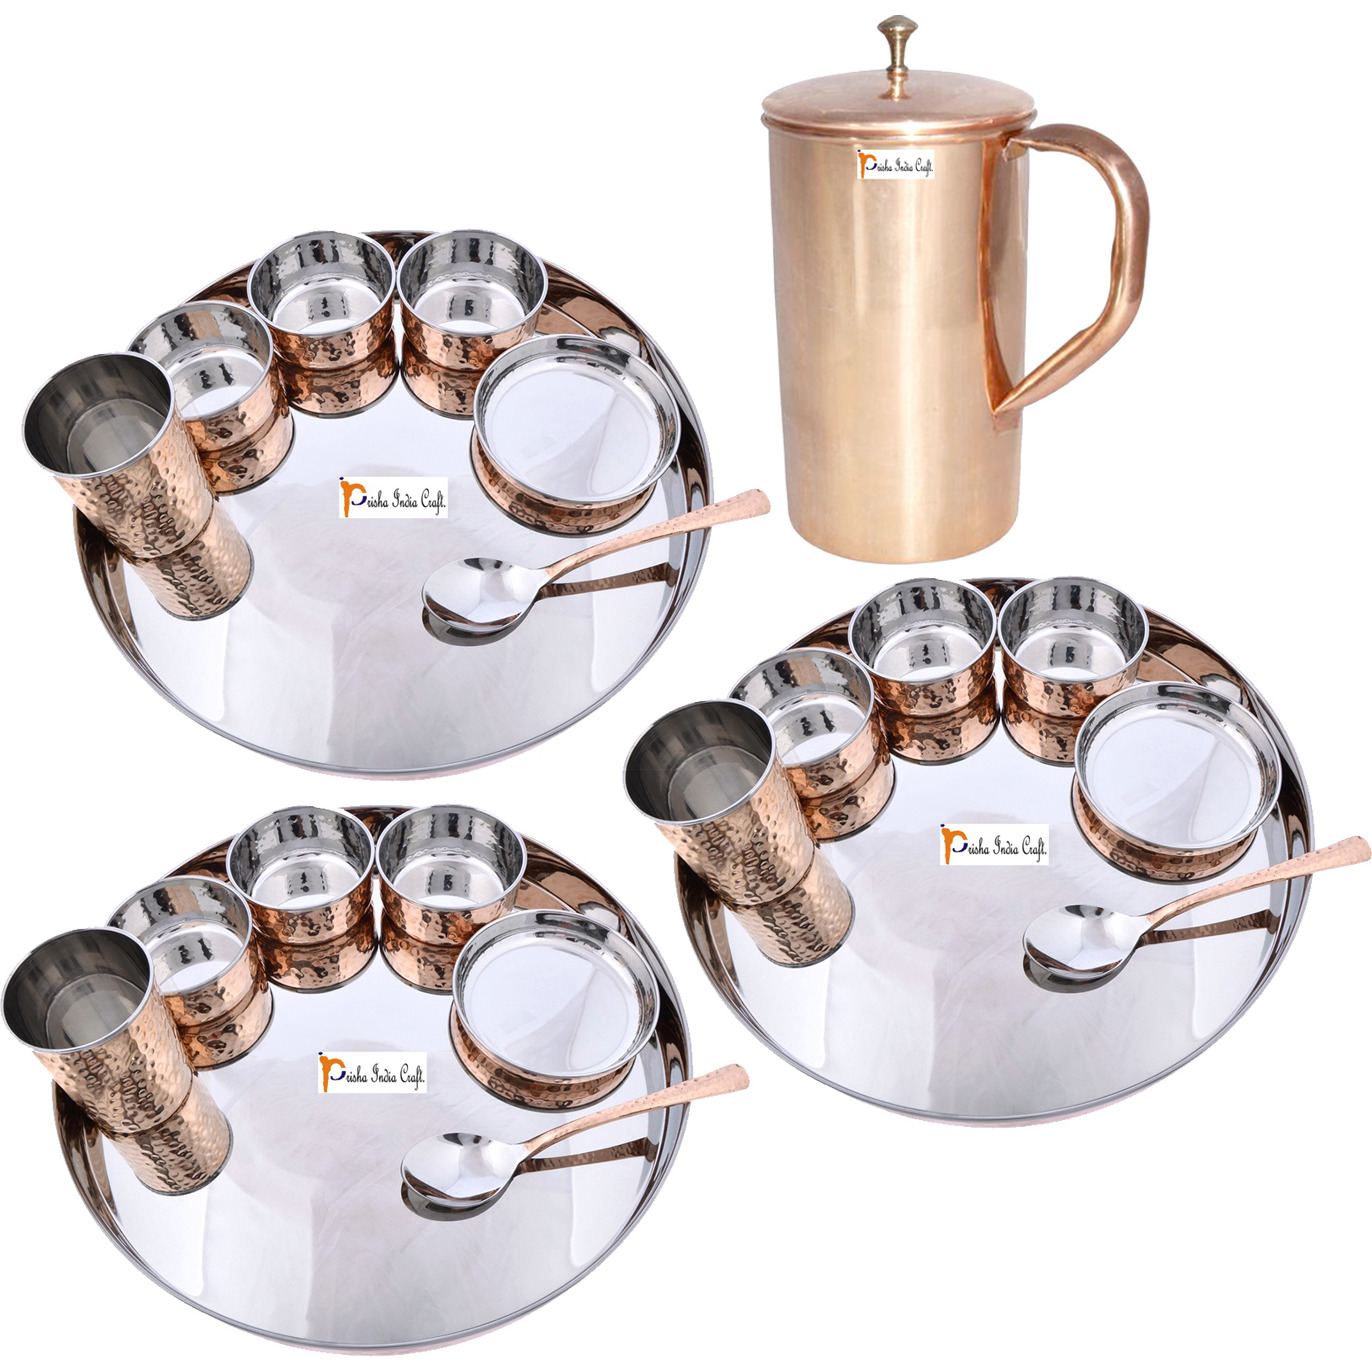 Prisha India Craft B. Set of 3 Dinnerware Traditional Stainless Steel Copper Dinner Set of Thali Plate, Bowls, Glass and Spoon, Dia 13  With 1 Pure Copper Classic Pitcher Jug - Christmas Gift